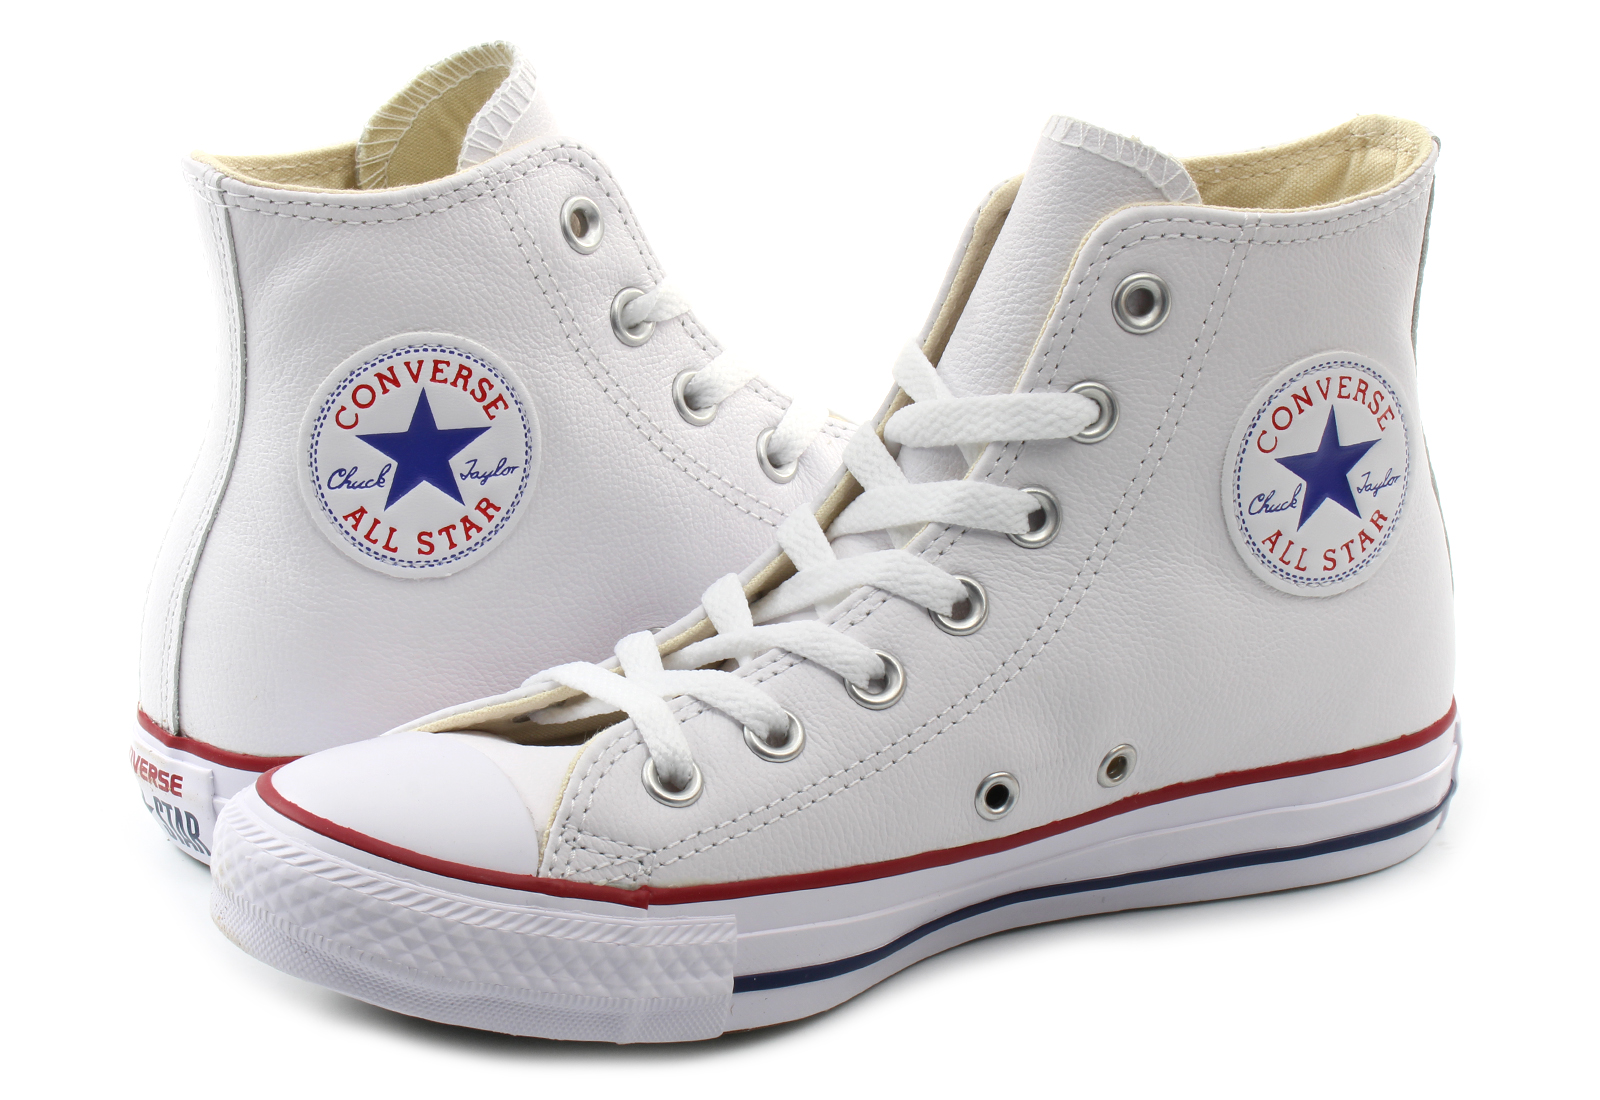 pase a ver Matemático frecuentemente Converse High trainers - Chuck Taylor All Star Core Hi Leather - 132169c -  Online shop for sneakers, shoes and boots